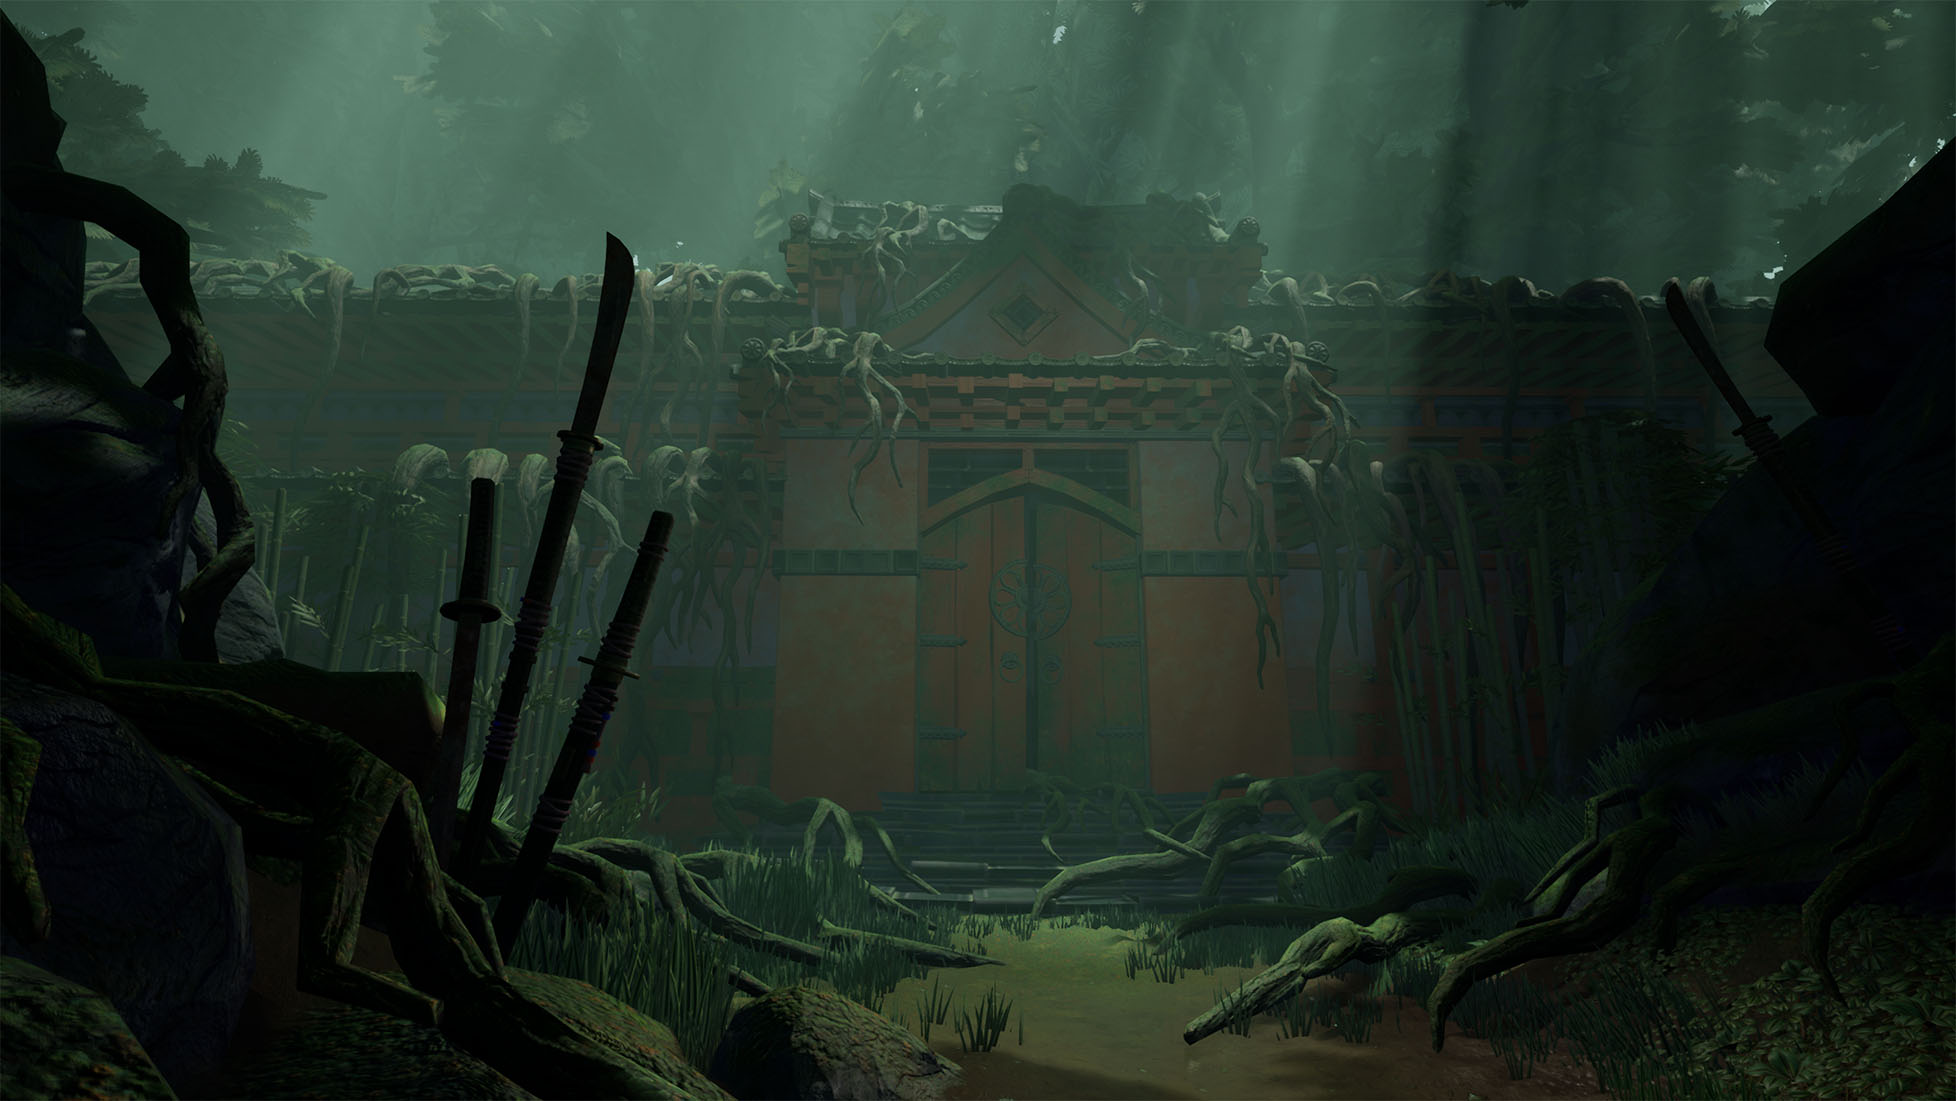 Lost Temple by Jordan_Noad_Mault for SFASX: Environment Art - itch.io